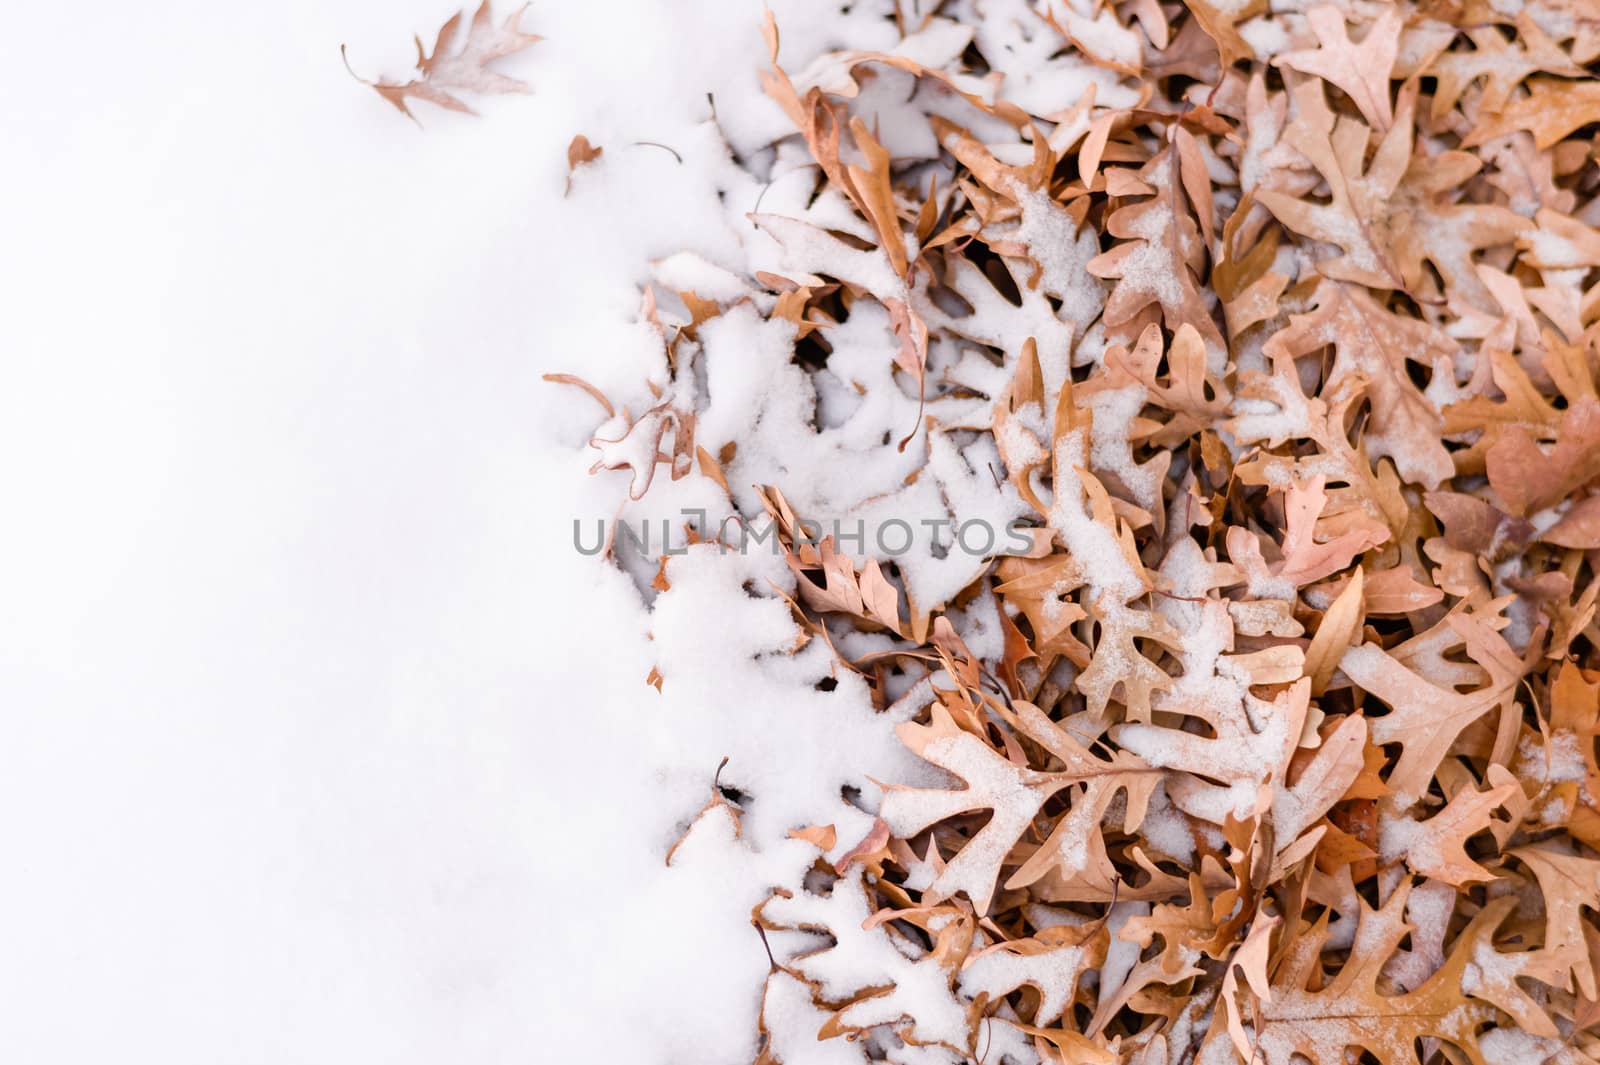 Fallen leafs and snow during winter time by IVYPHOTOS